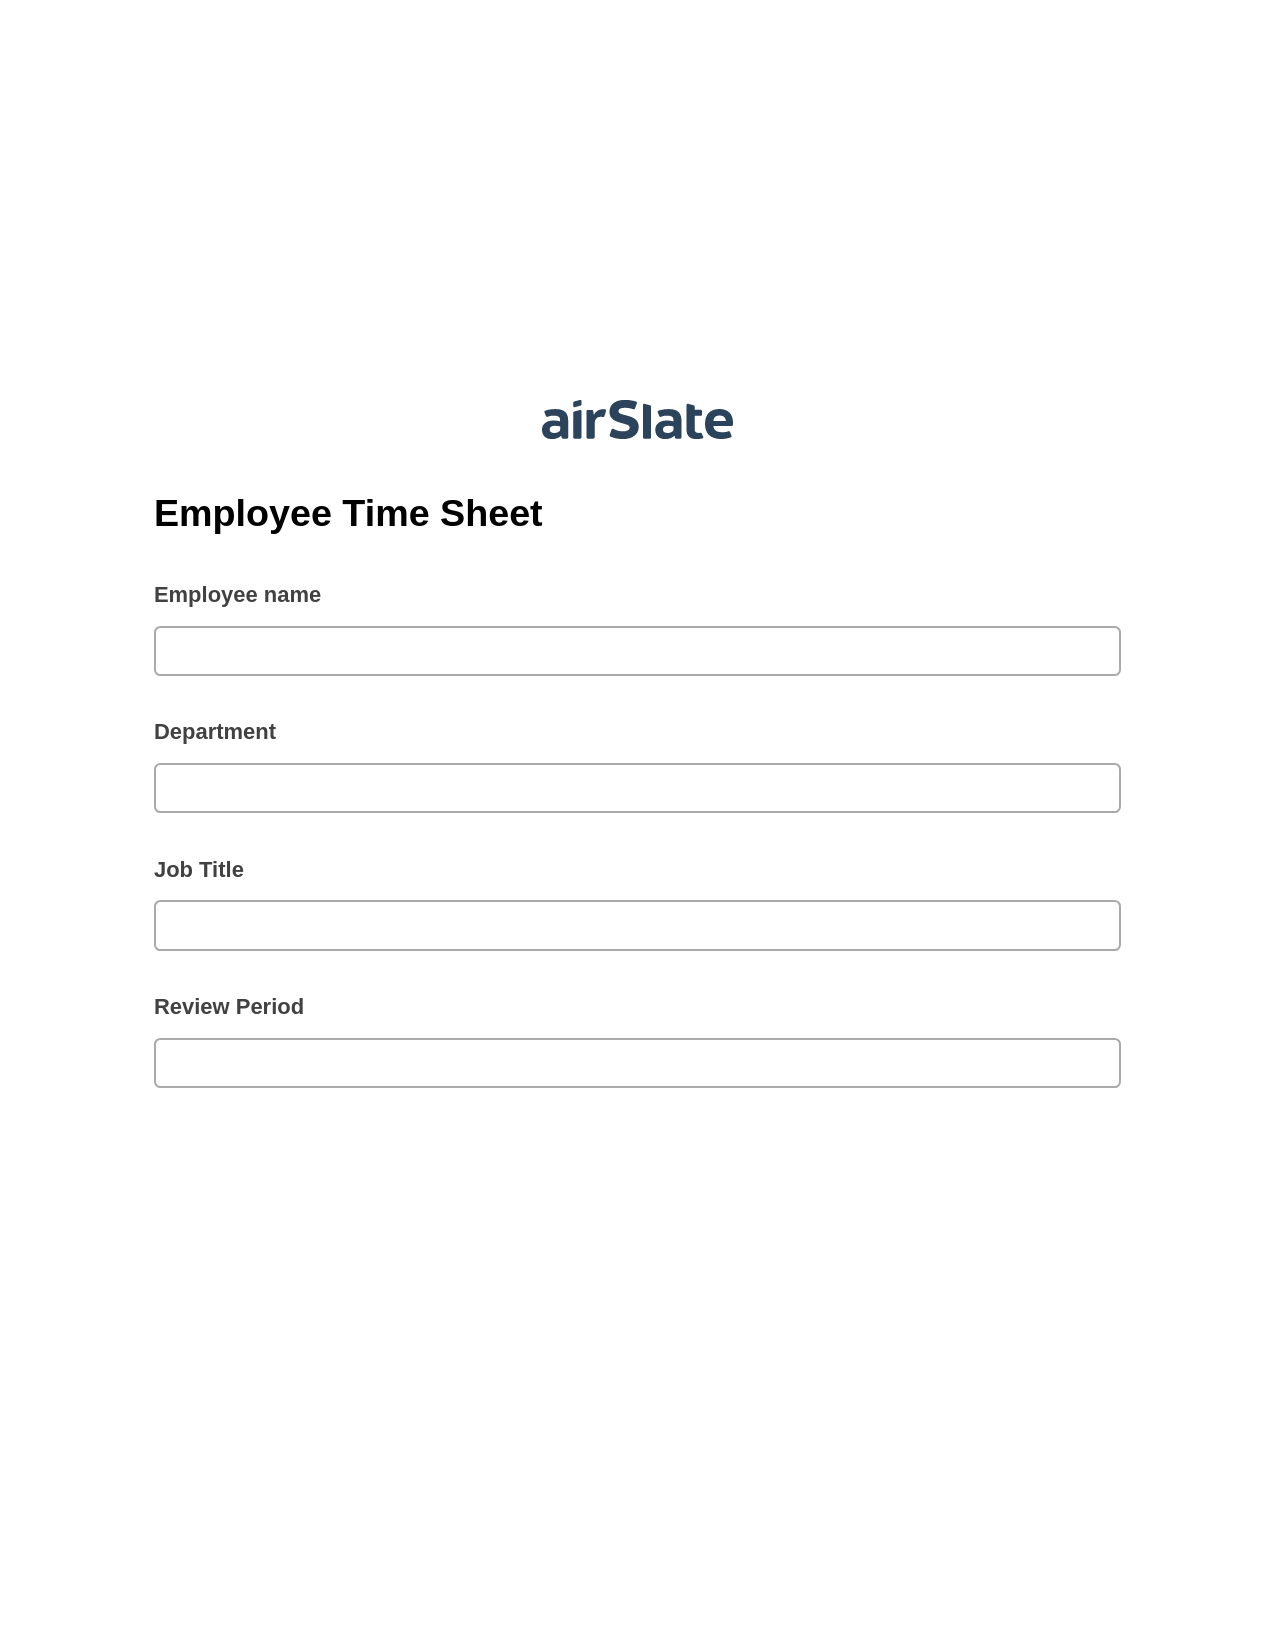 Employee Time Sheet Pre-fill Dropdowns from CSV file Bot, Send Mailchimp Campaign Bot, Archive to SharePoint Folder Bot